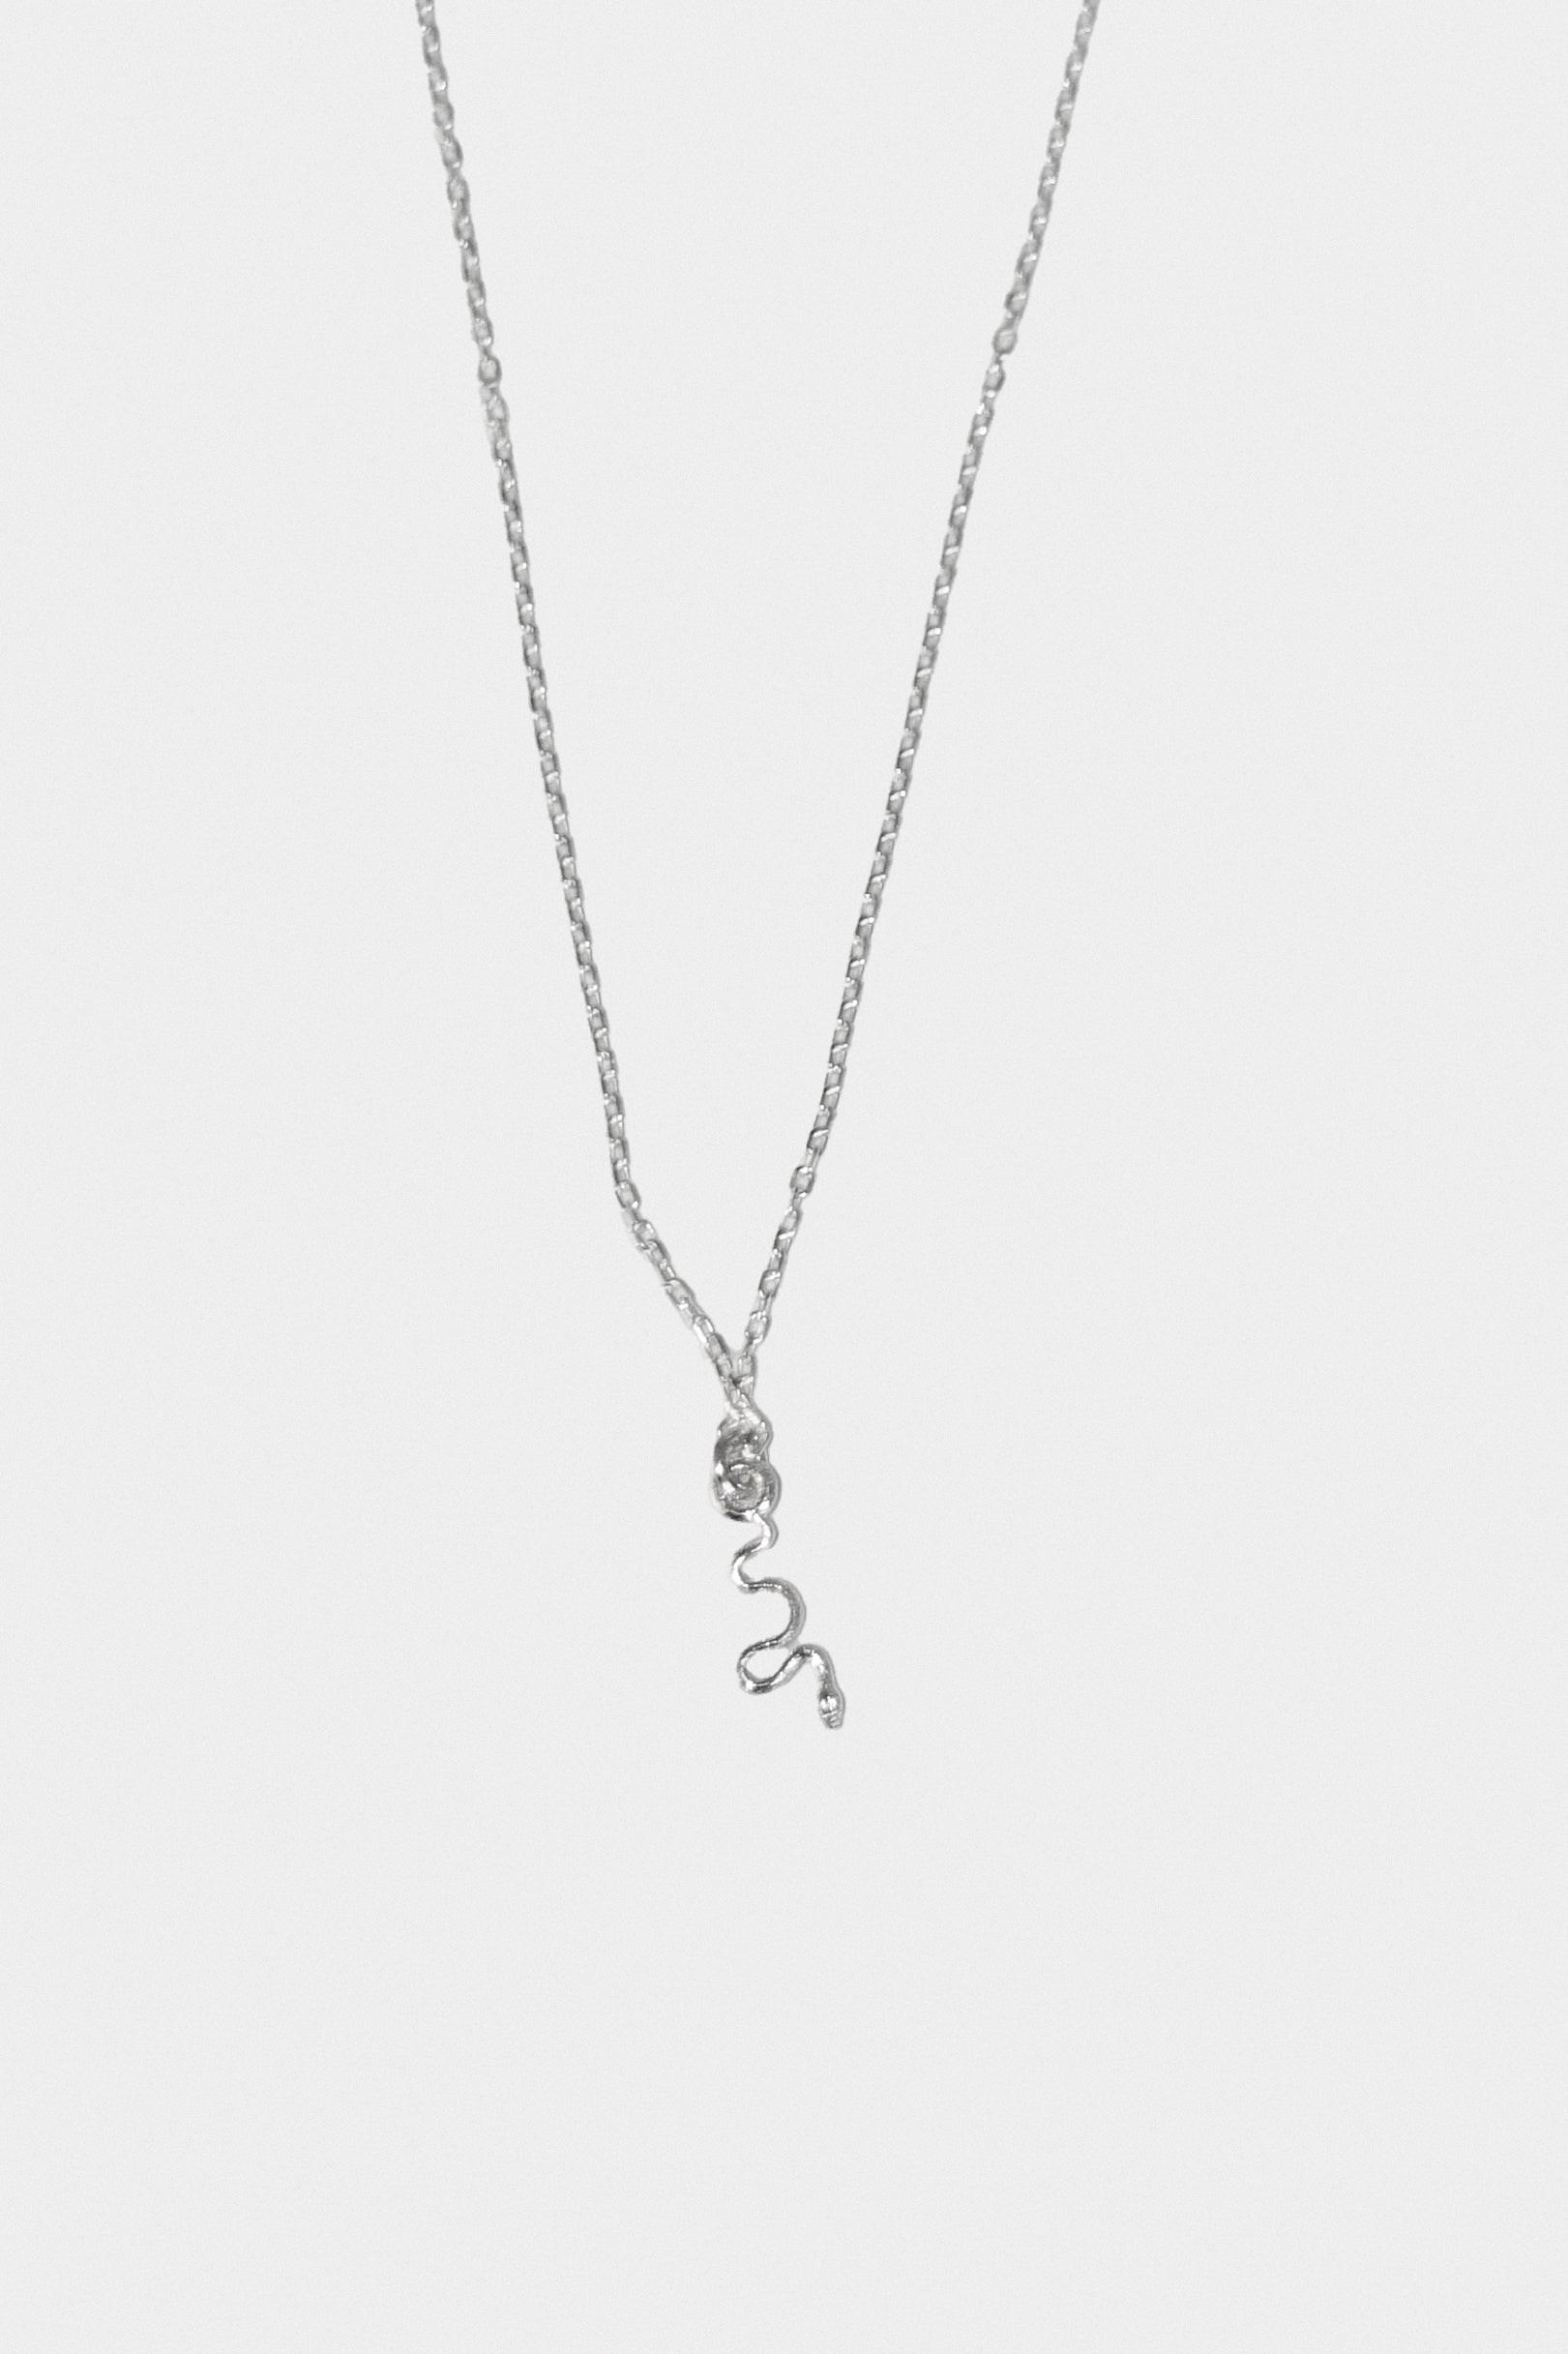 Itty Bitty Snake Pendant Necklace in Sterling Silver